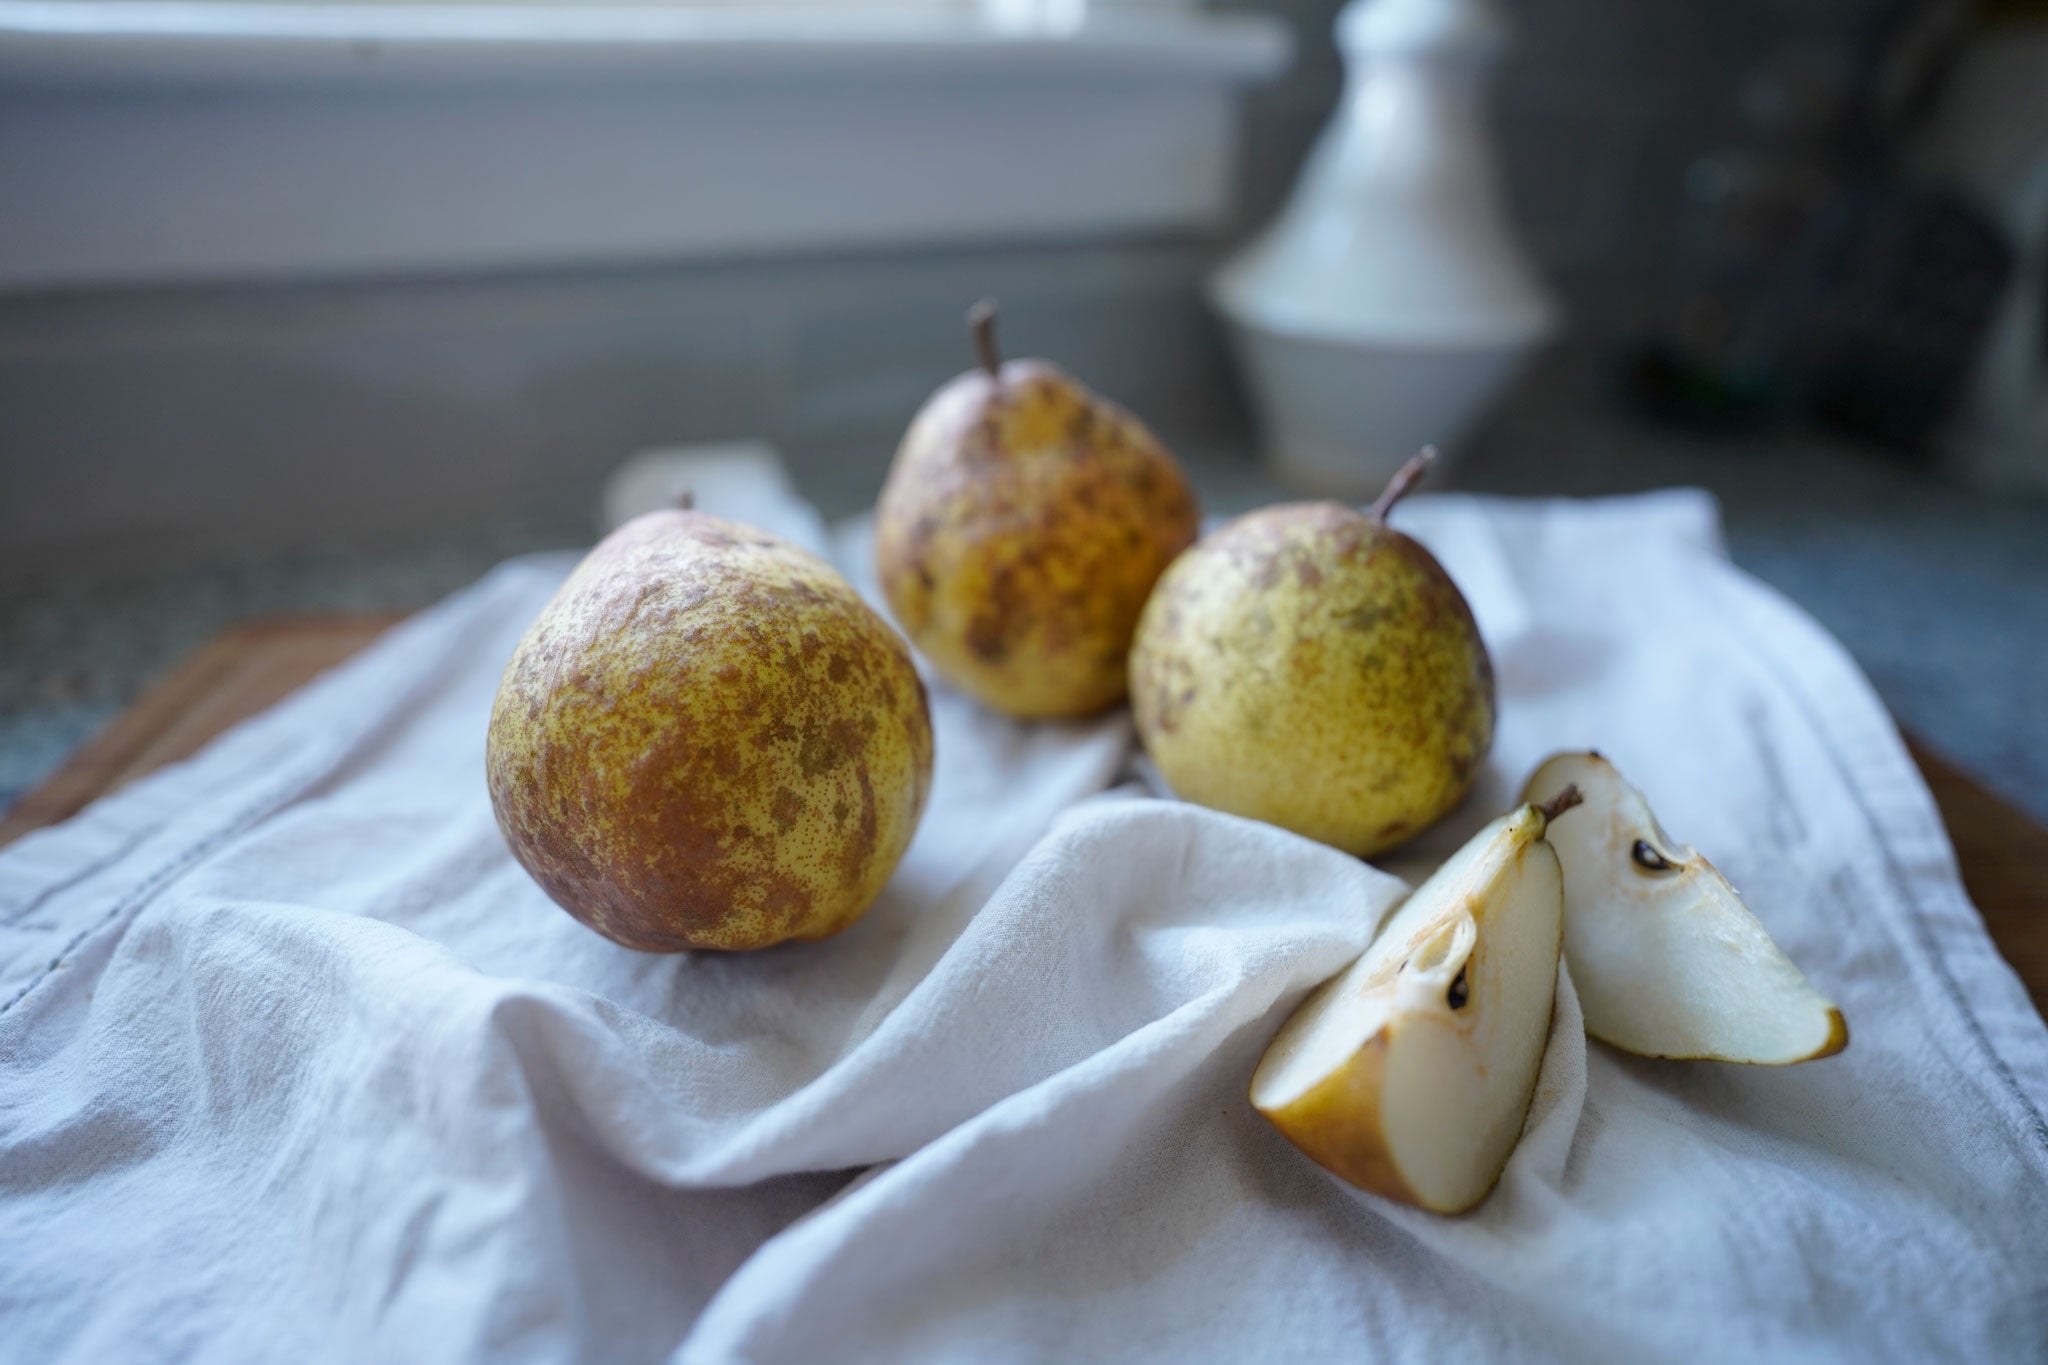 Pears and pear slices on white dish towel and wood cutting board on kitchen counter